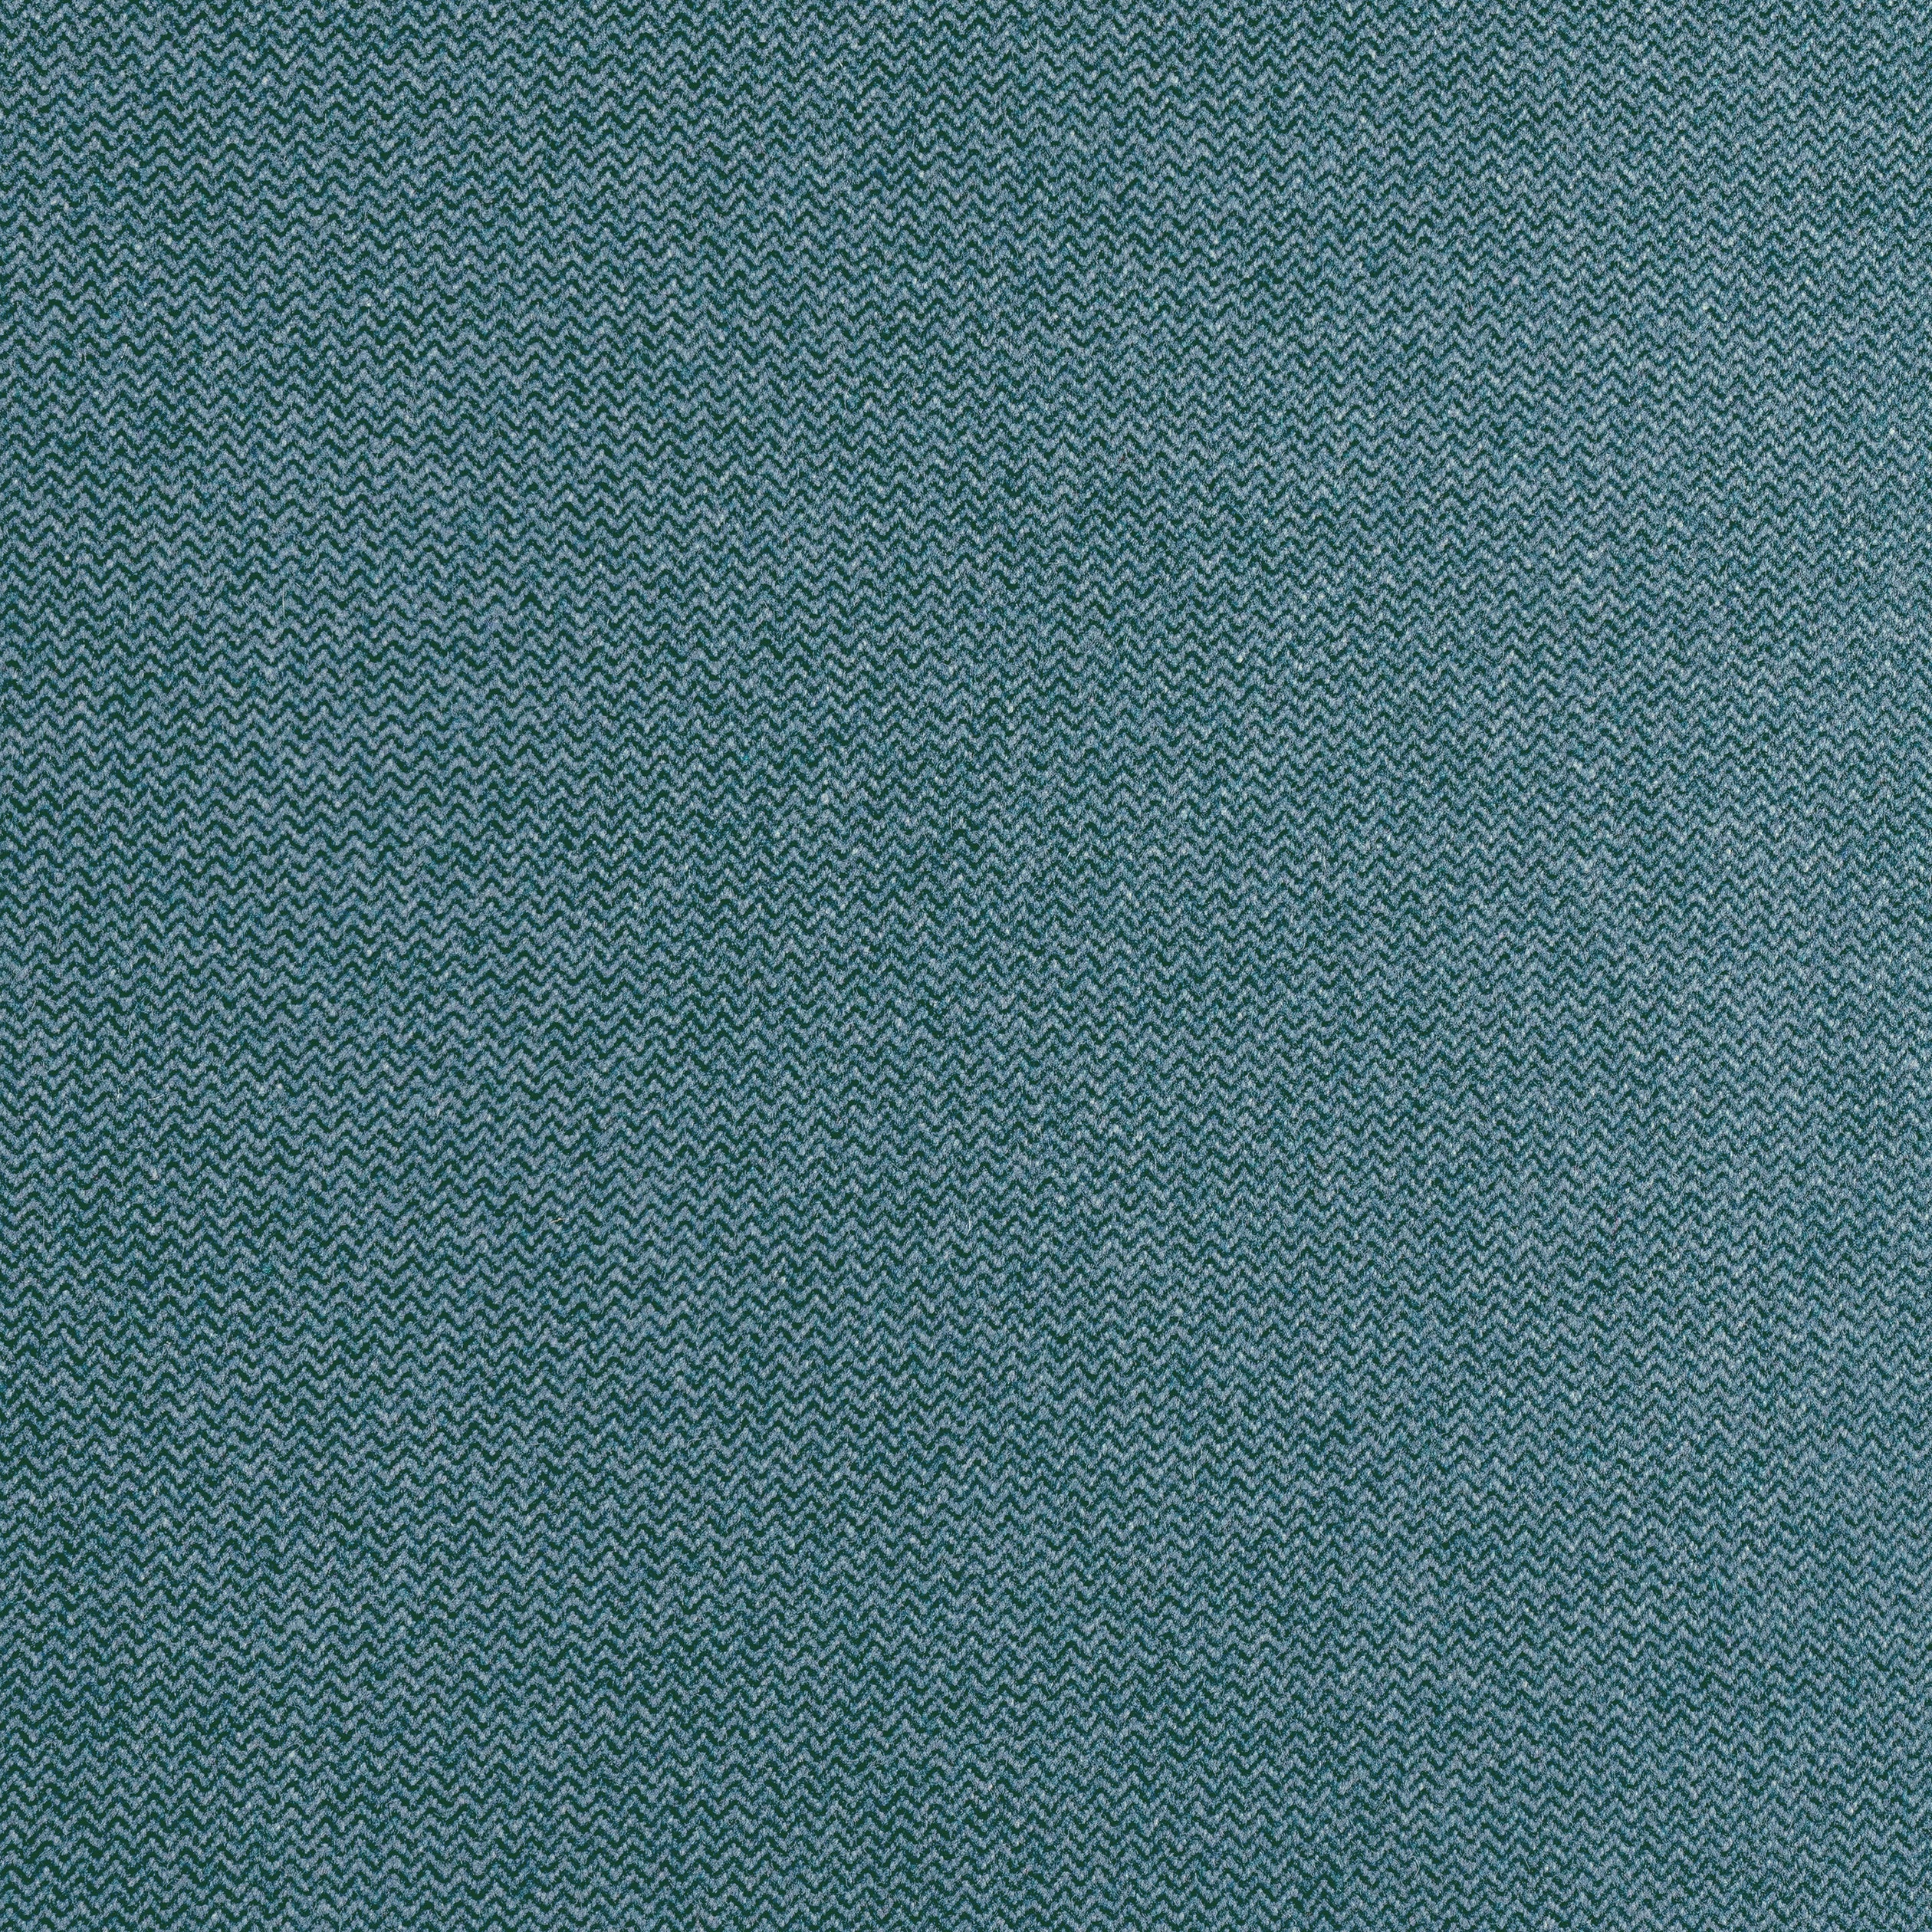 Dorset fabric in lagoon color - pattern number W80912 - by Thibaut in the Dunmore collection